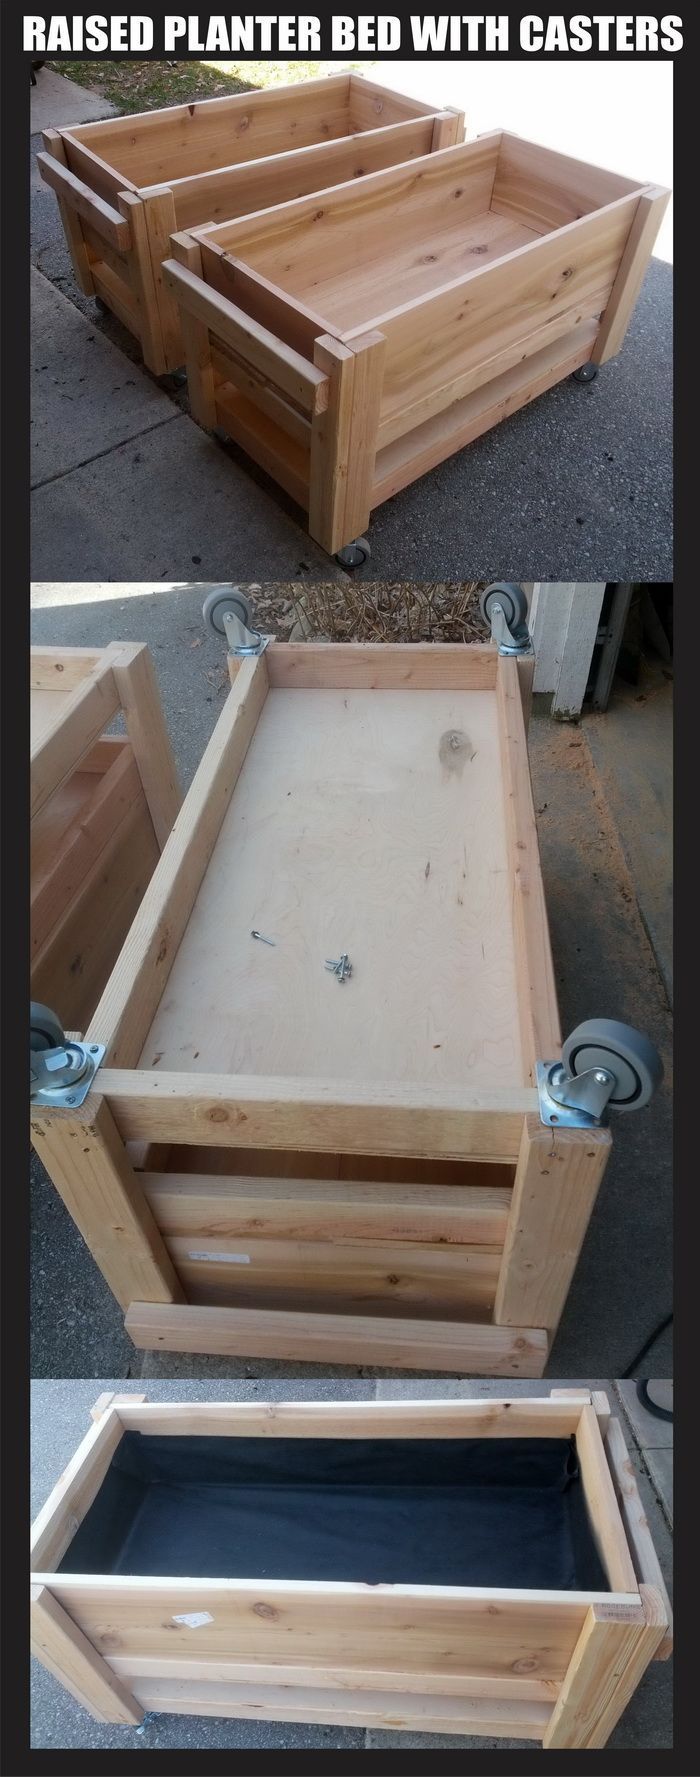 How To Build a Raised Planter Bed for Under $50 For Your Next Garden Project DIY...